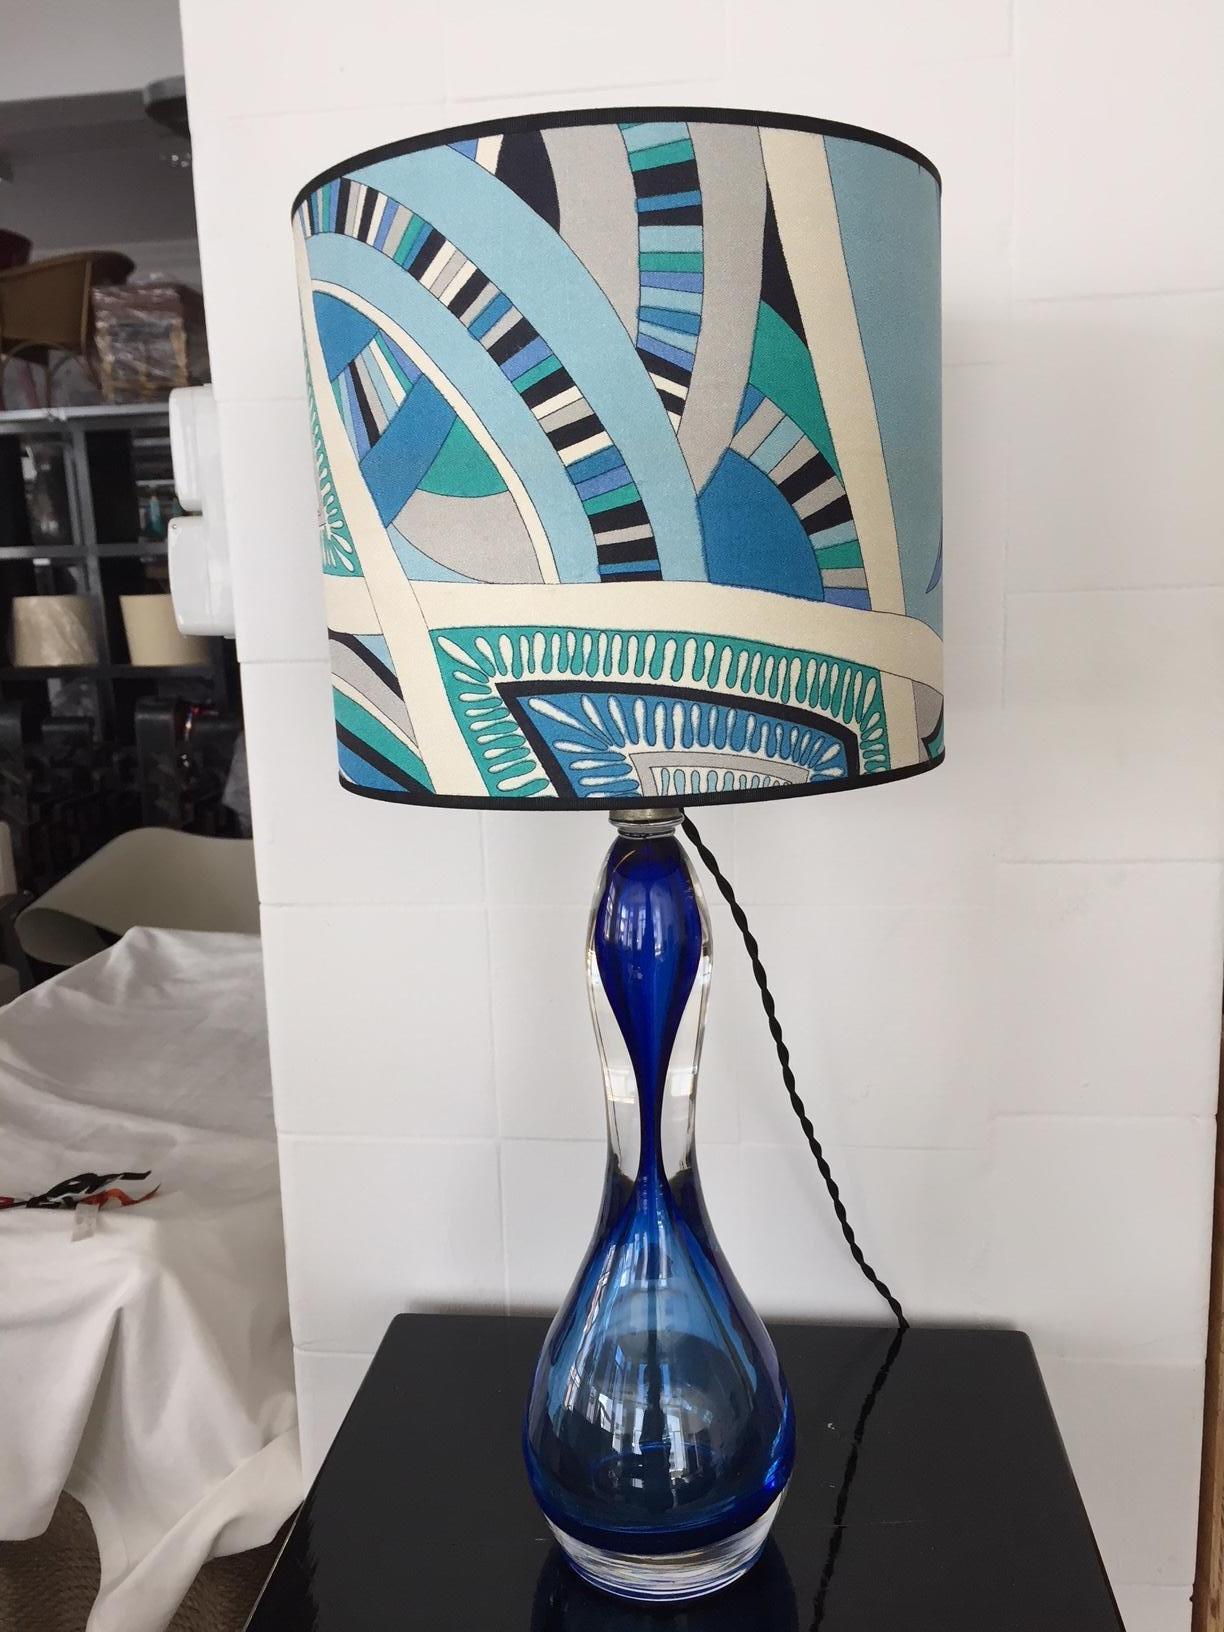 Val Saint-Lambert crystal table lamp base, engraved at the bottom
Size crystal base 36cm high, 12cm diameter at the bottom
Total height with lampshade 60cm
lampshade Round Shape 22cm high x 26cm diameter
Made from Vintage Pucci Silk